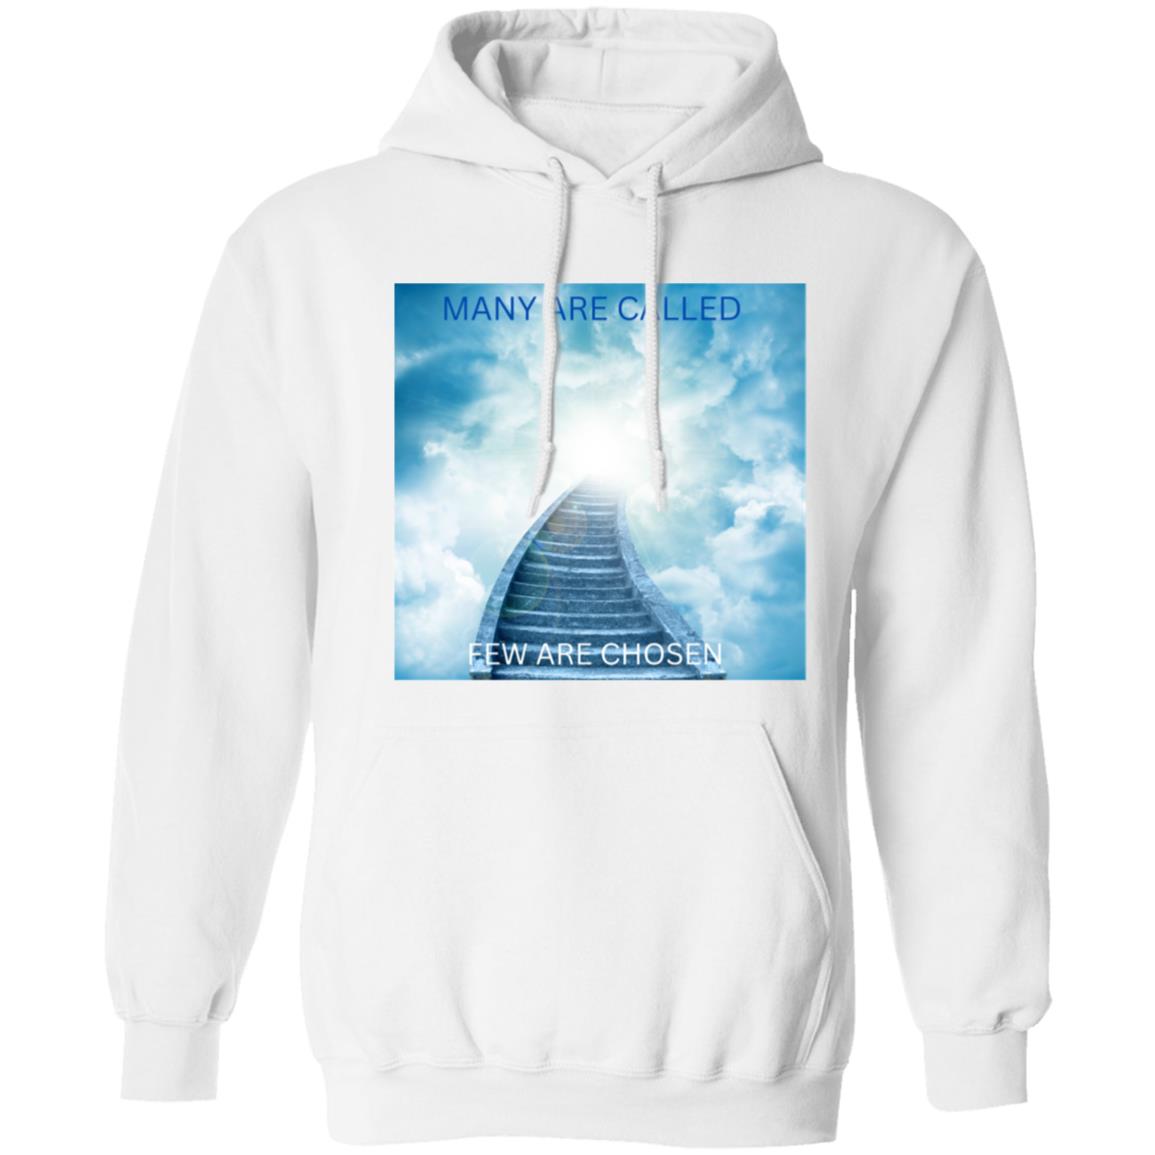 MANY ARE CALLED... UNISEX  Hoodie